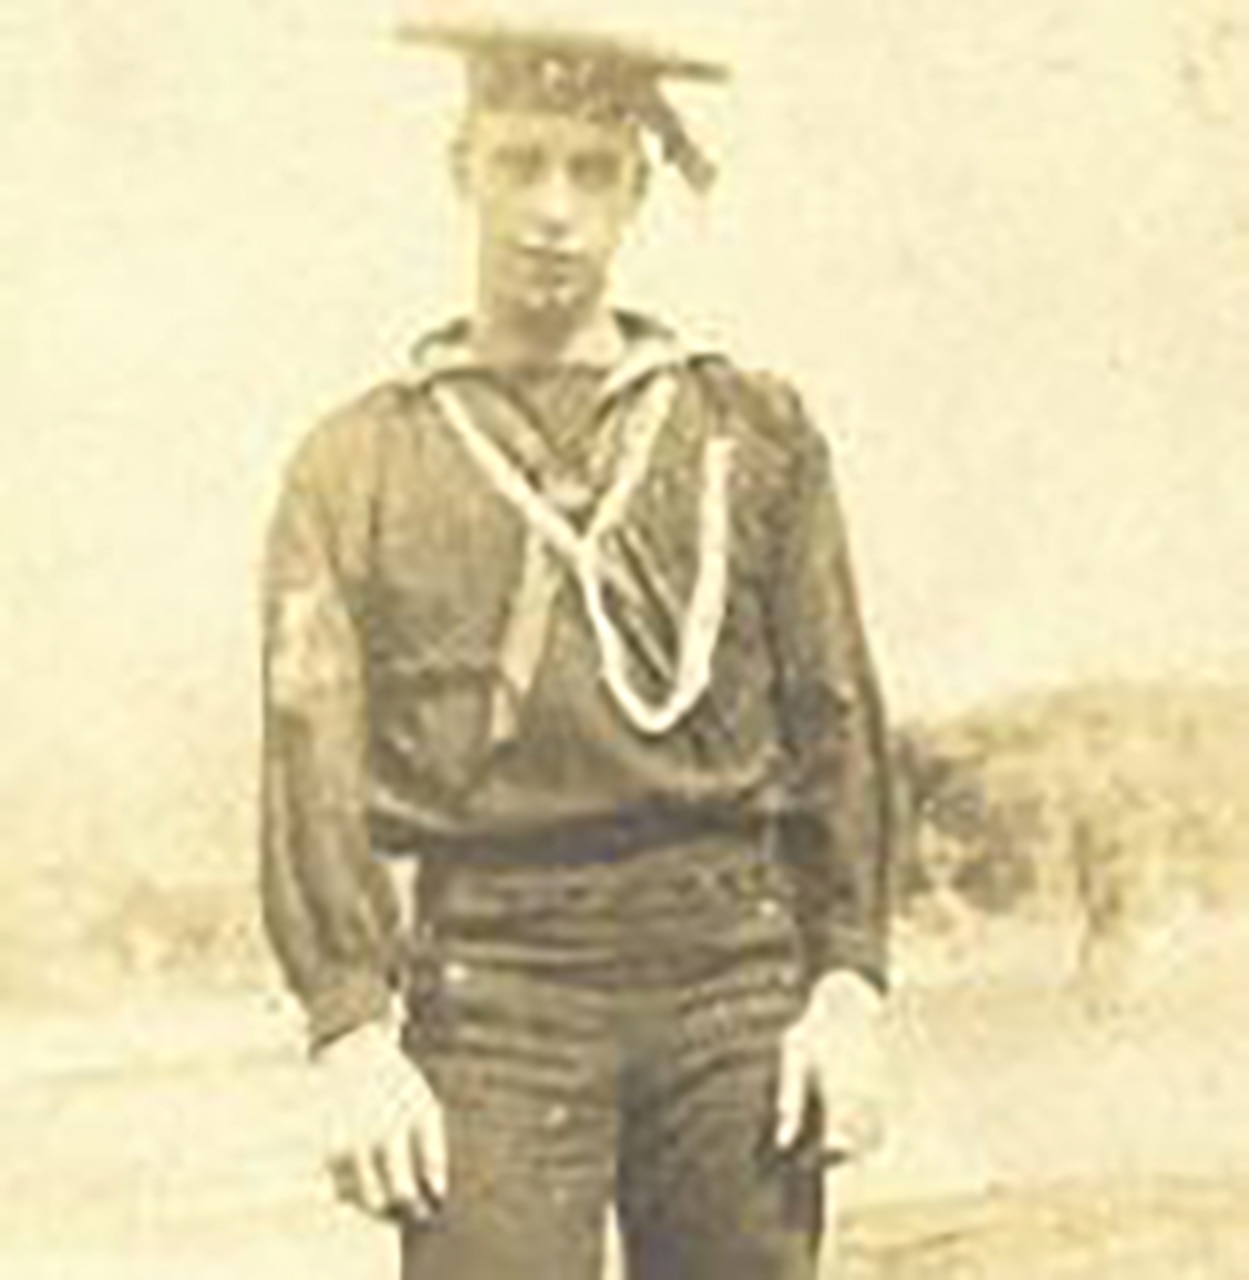 A man in a uniform and cap poses for a photo.